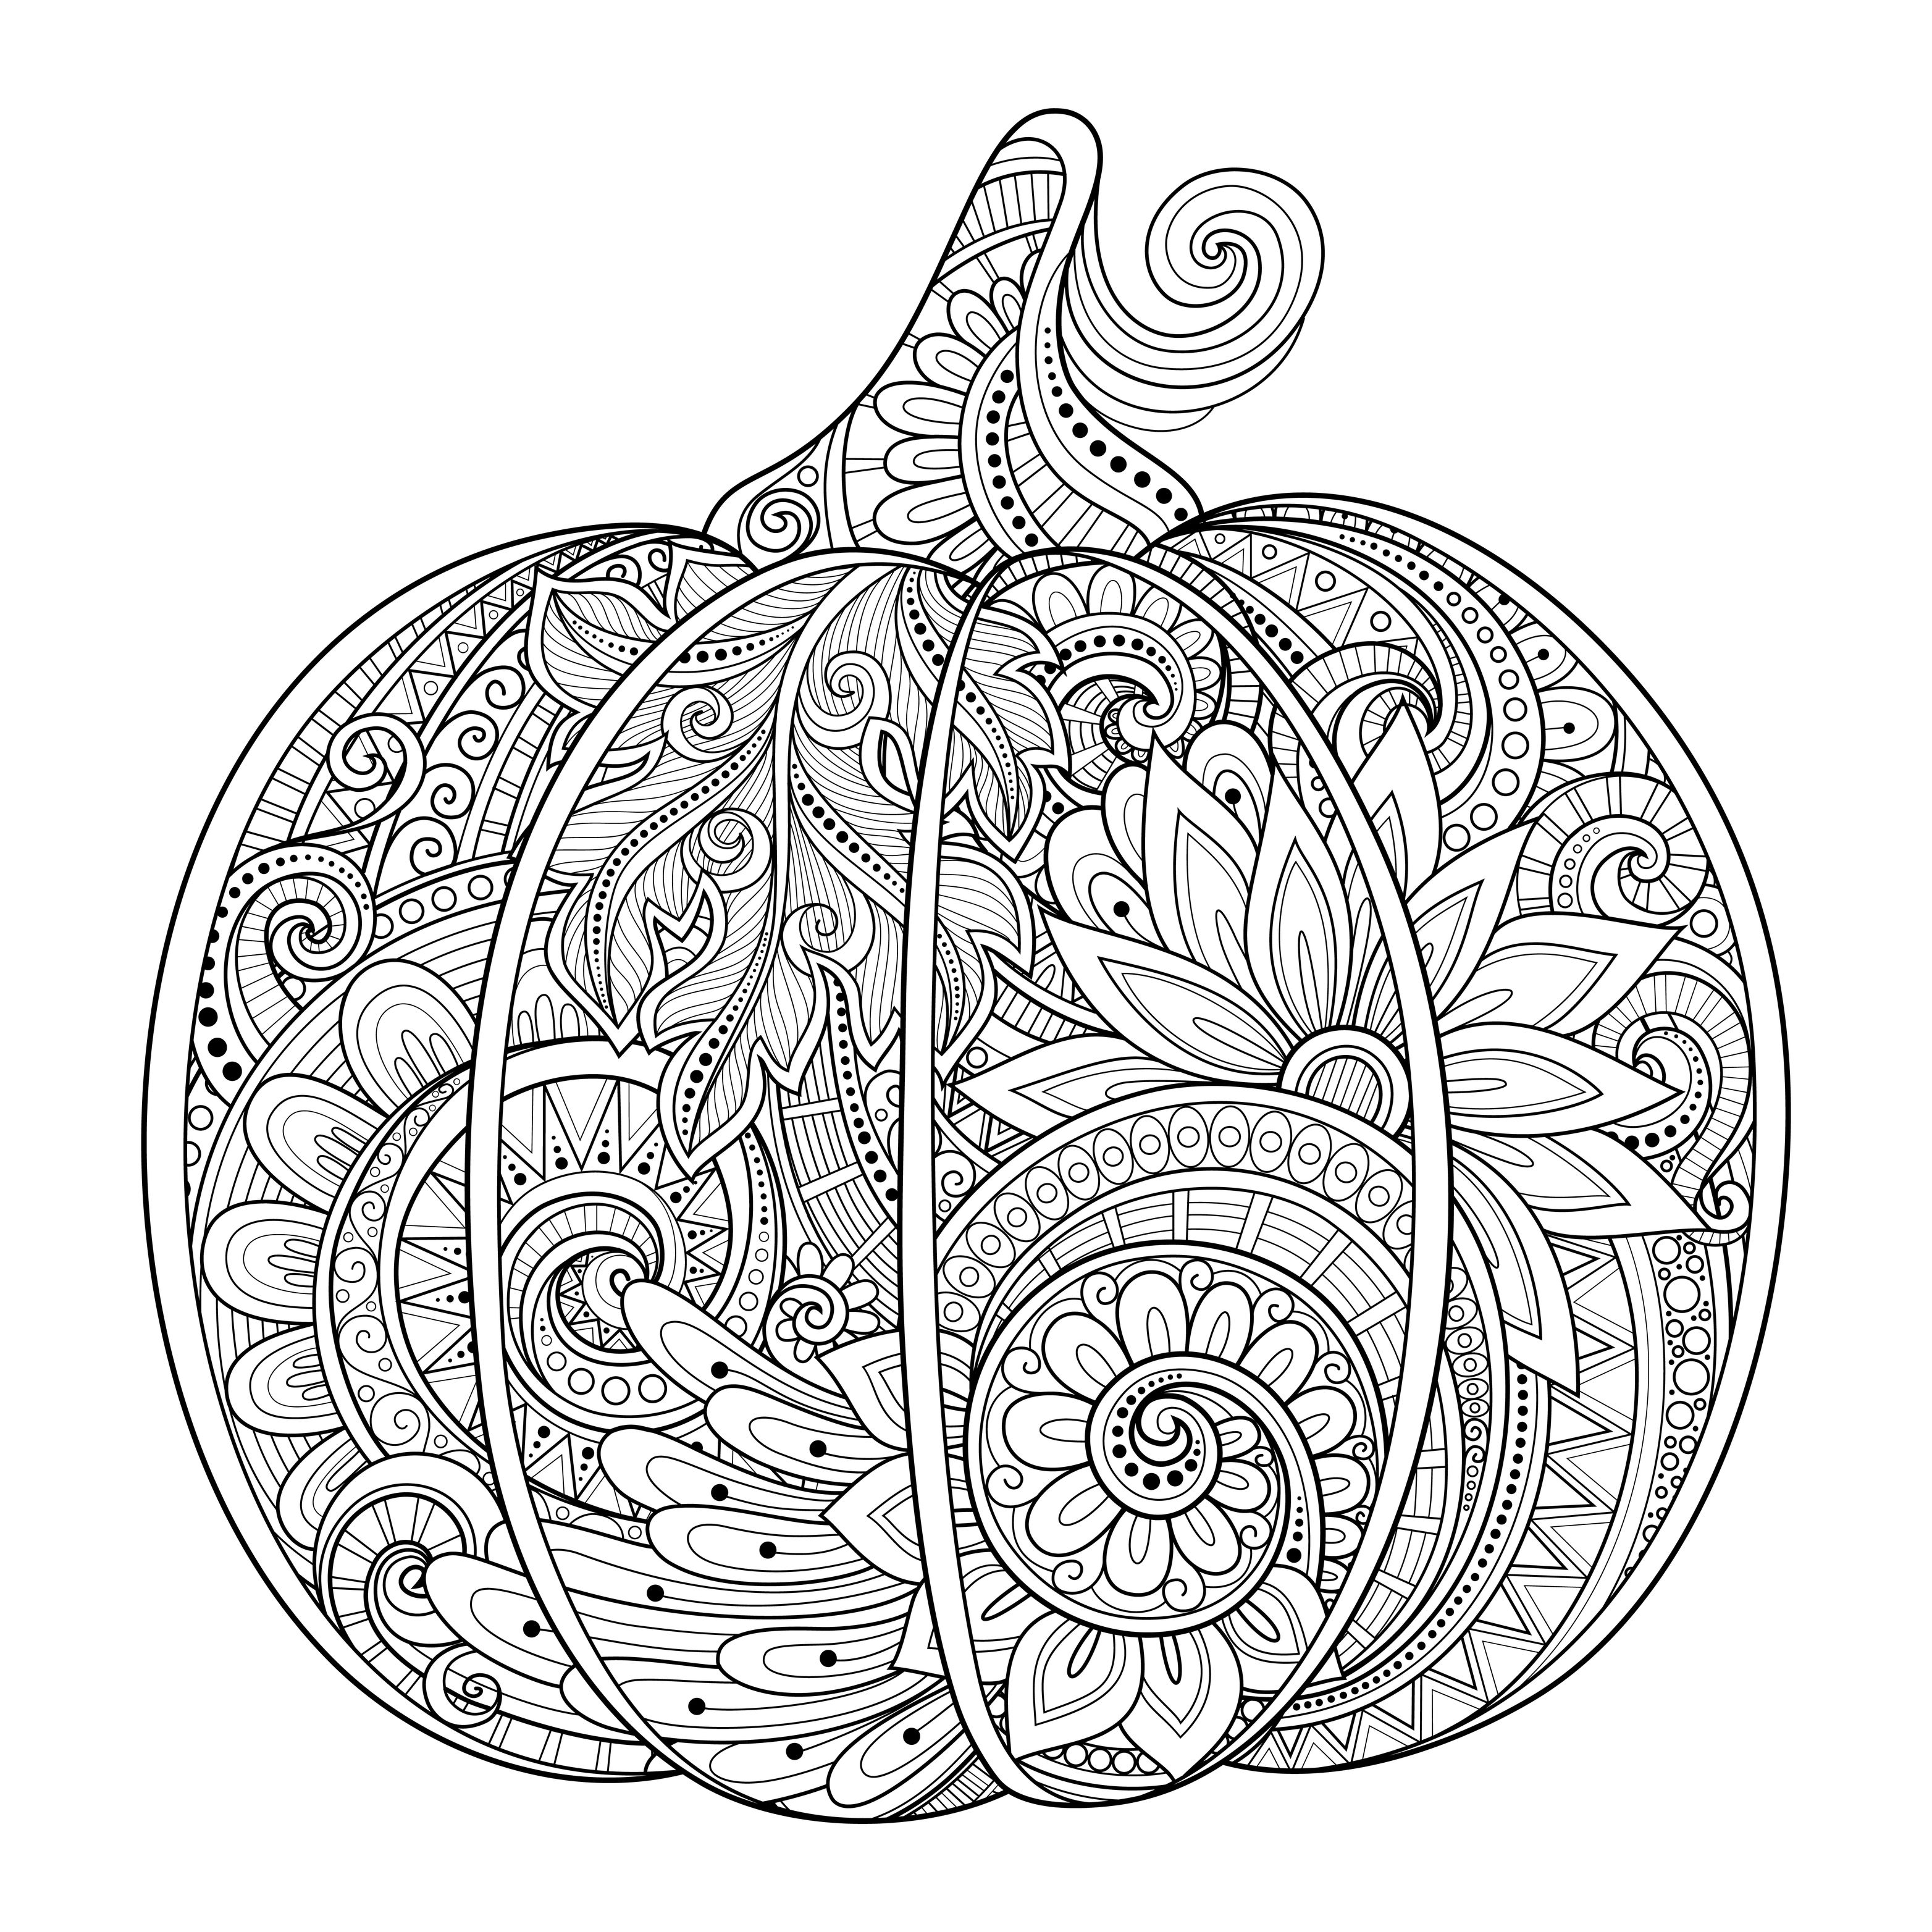 Zentangle style Halloween pumpkin. Kids will have fun coloring this pumpkin using bright colors, perfectly matching the Zentangle patterns and the Halloween theme.